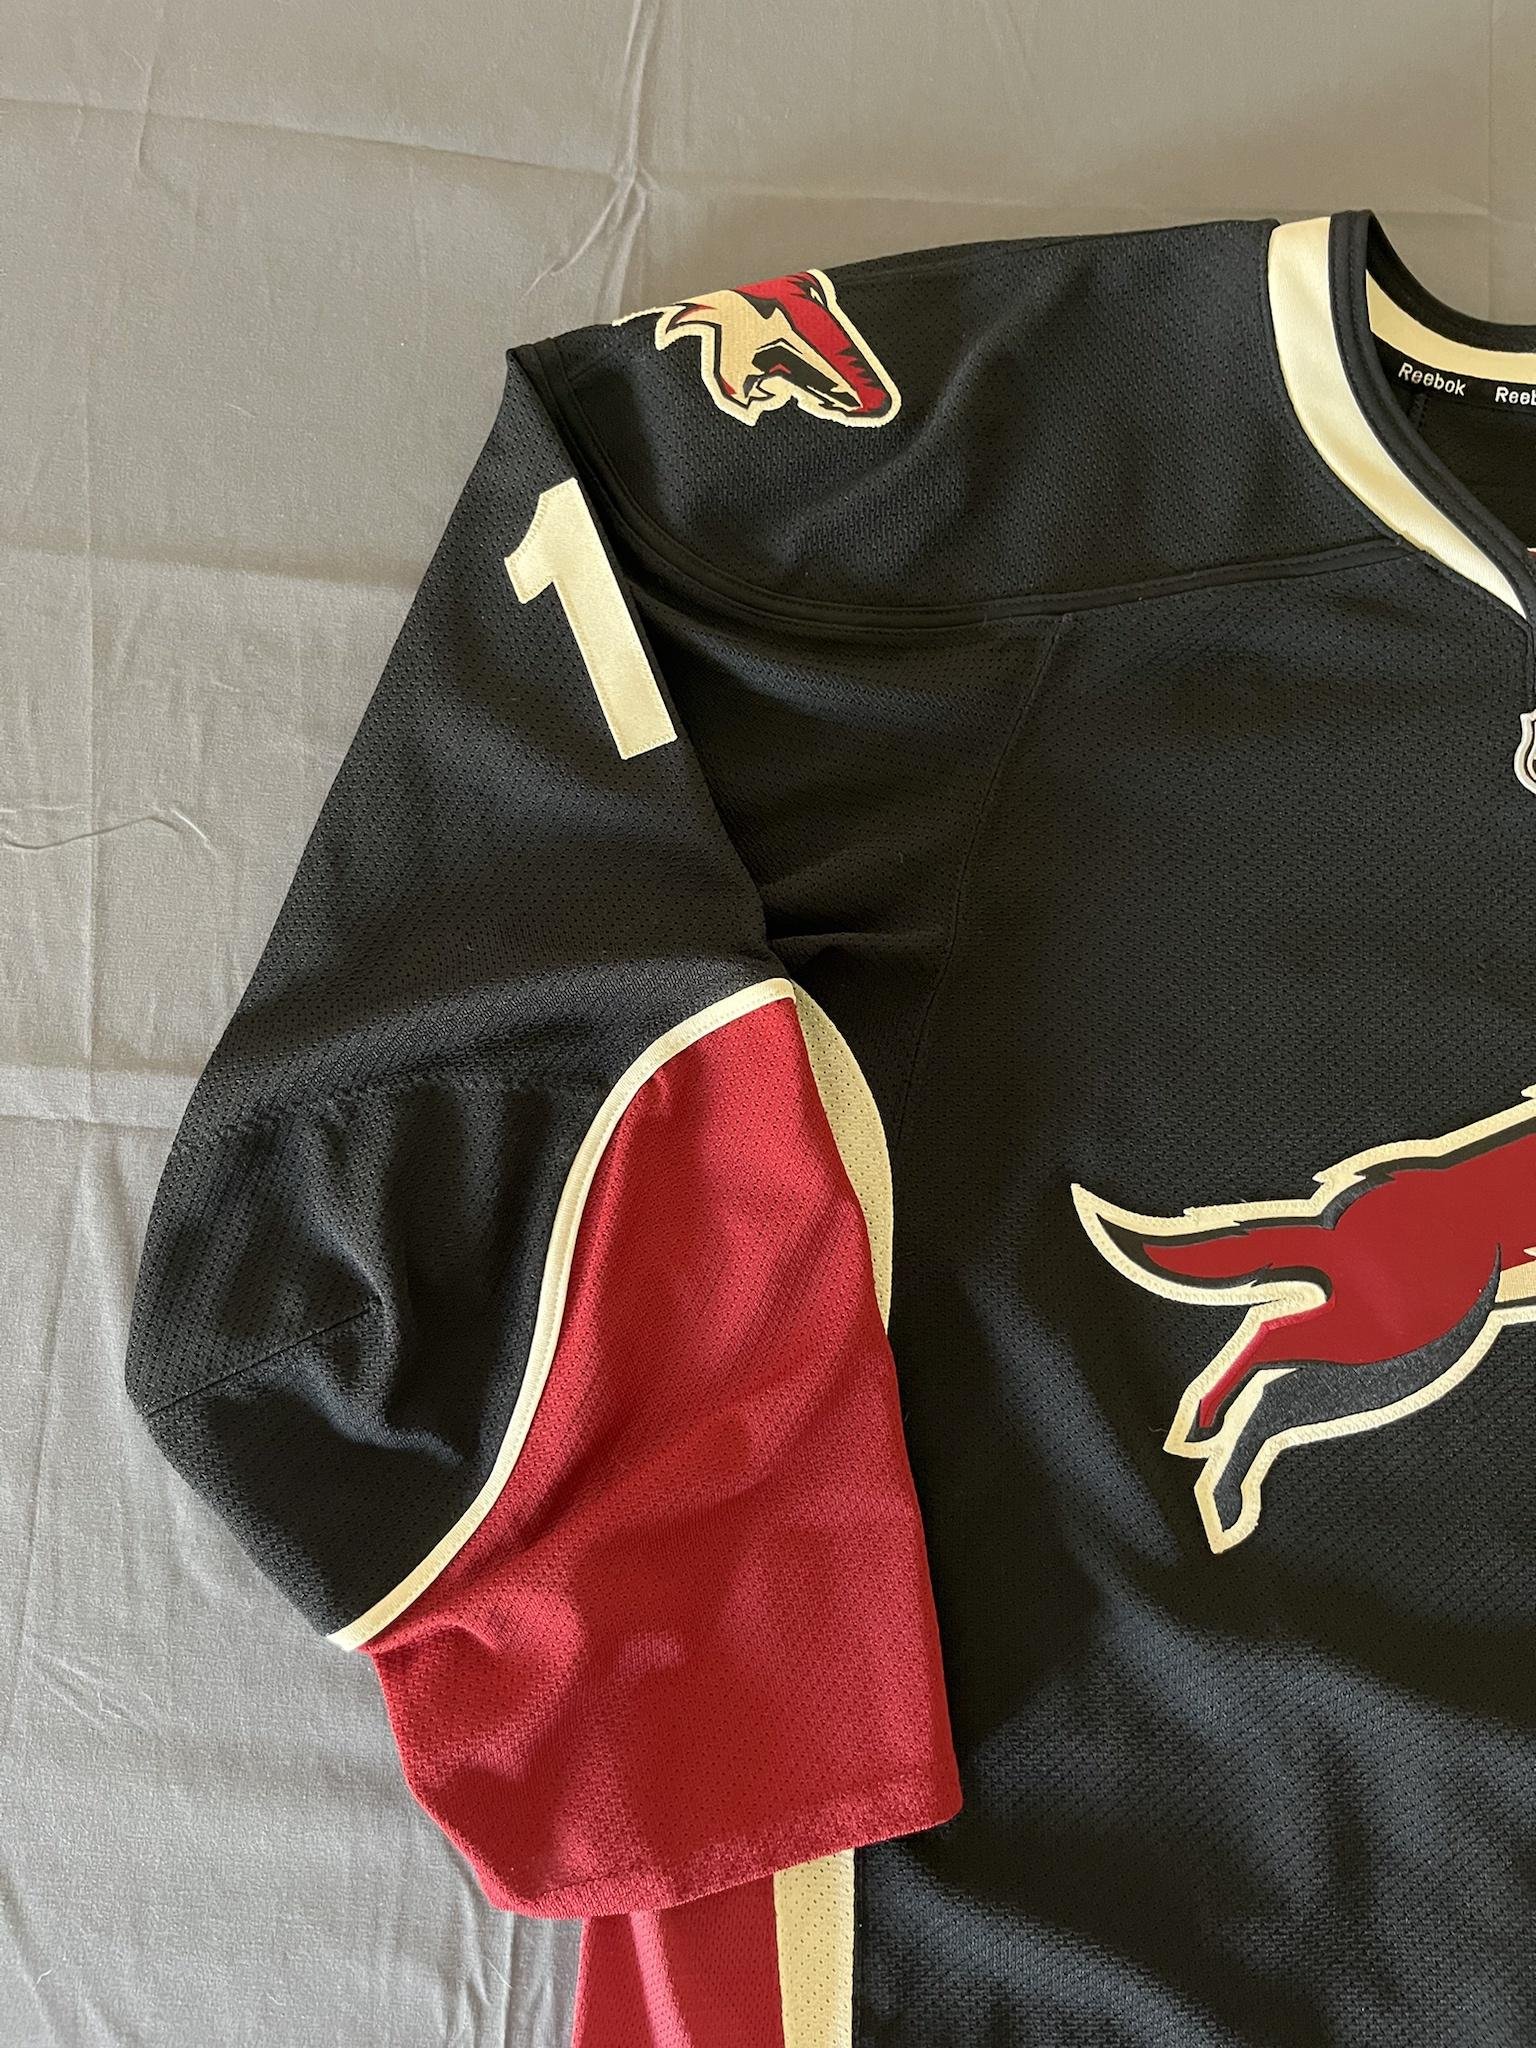 K1 Sportswear Coyotes Alternate Fashion Jerseys made in the 90s